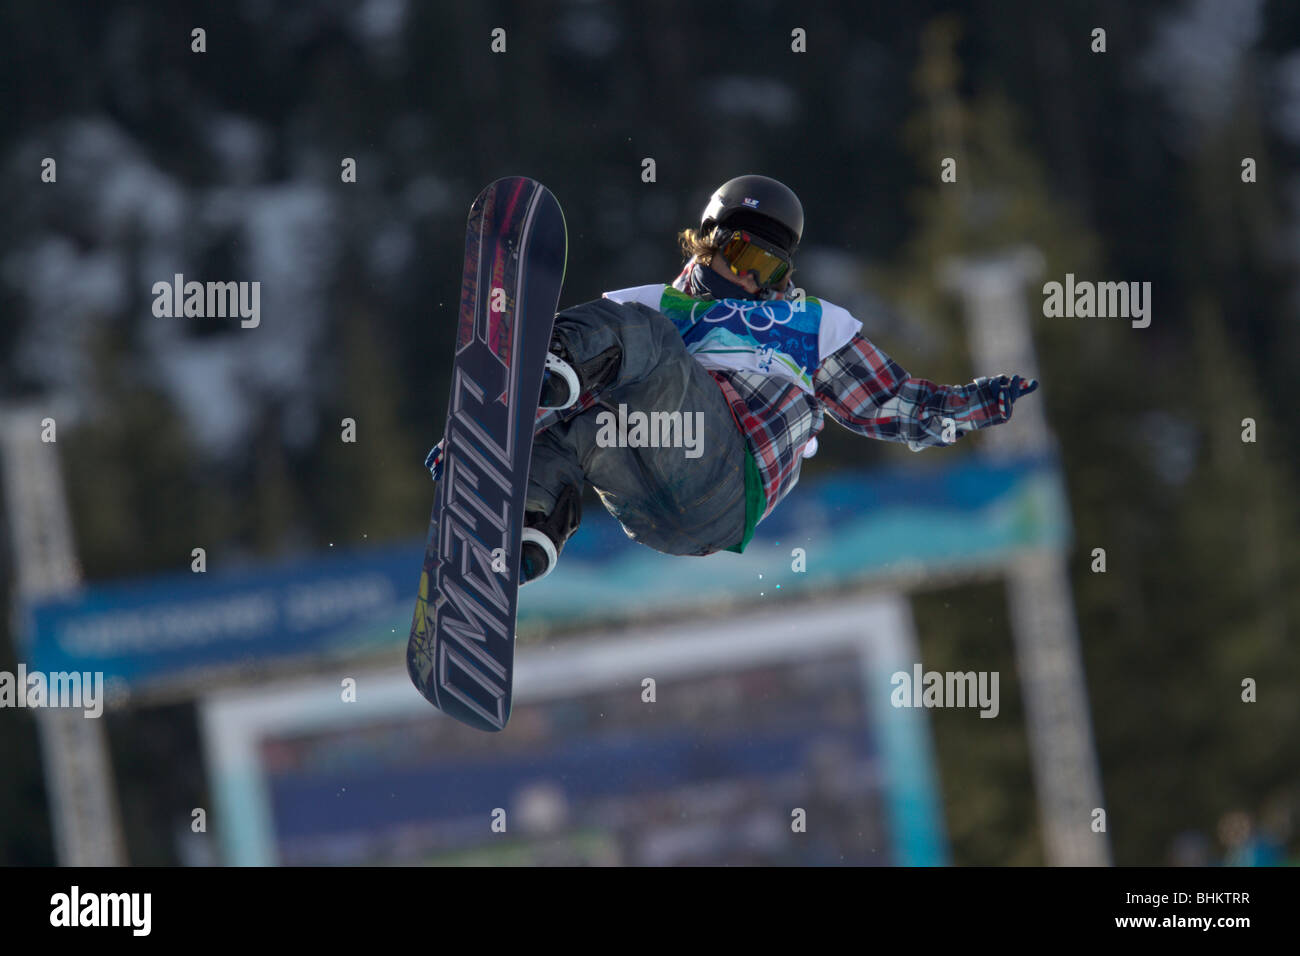 Louie Vito (USA) competing in the Men's Snowboard Halfpipe event at the 2010 Olympic Winter Games Stock Photo